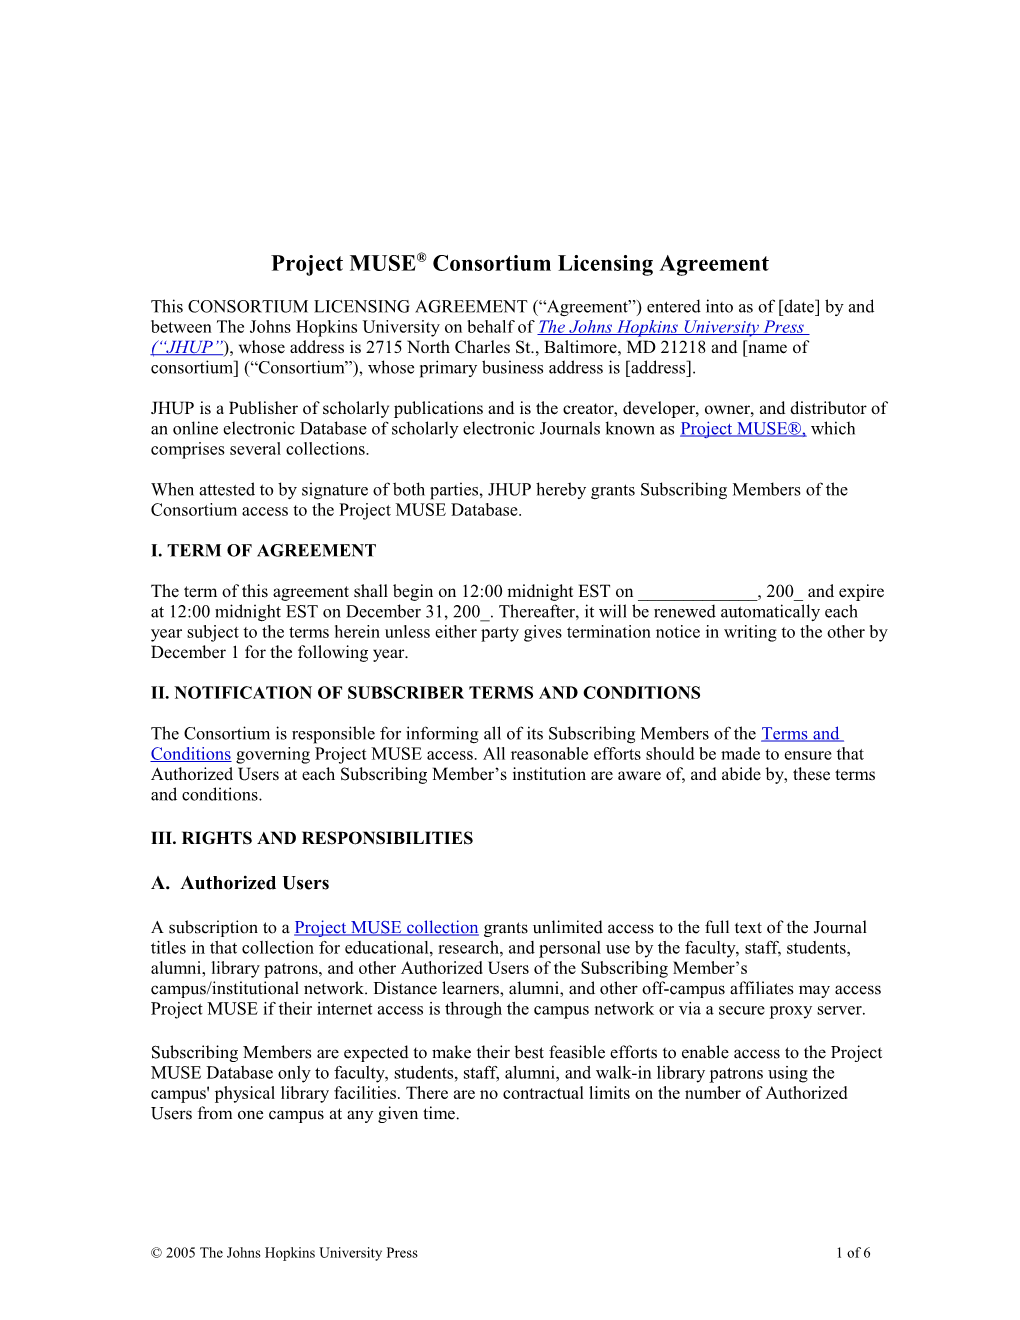 Project Museâ Consortium Licensing Agreement